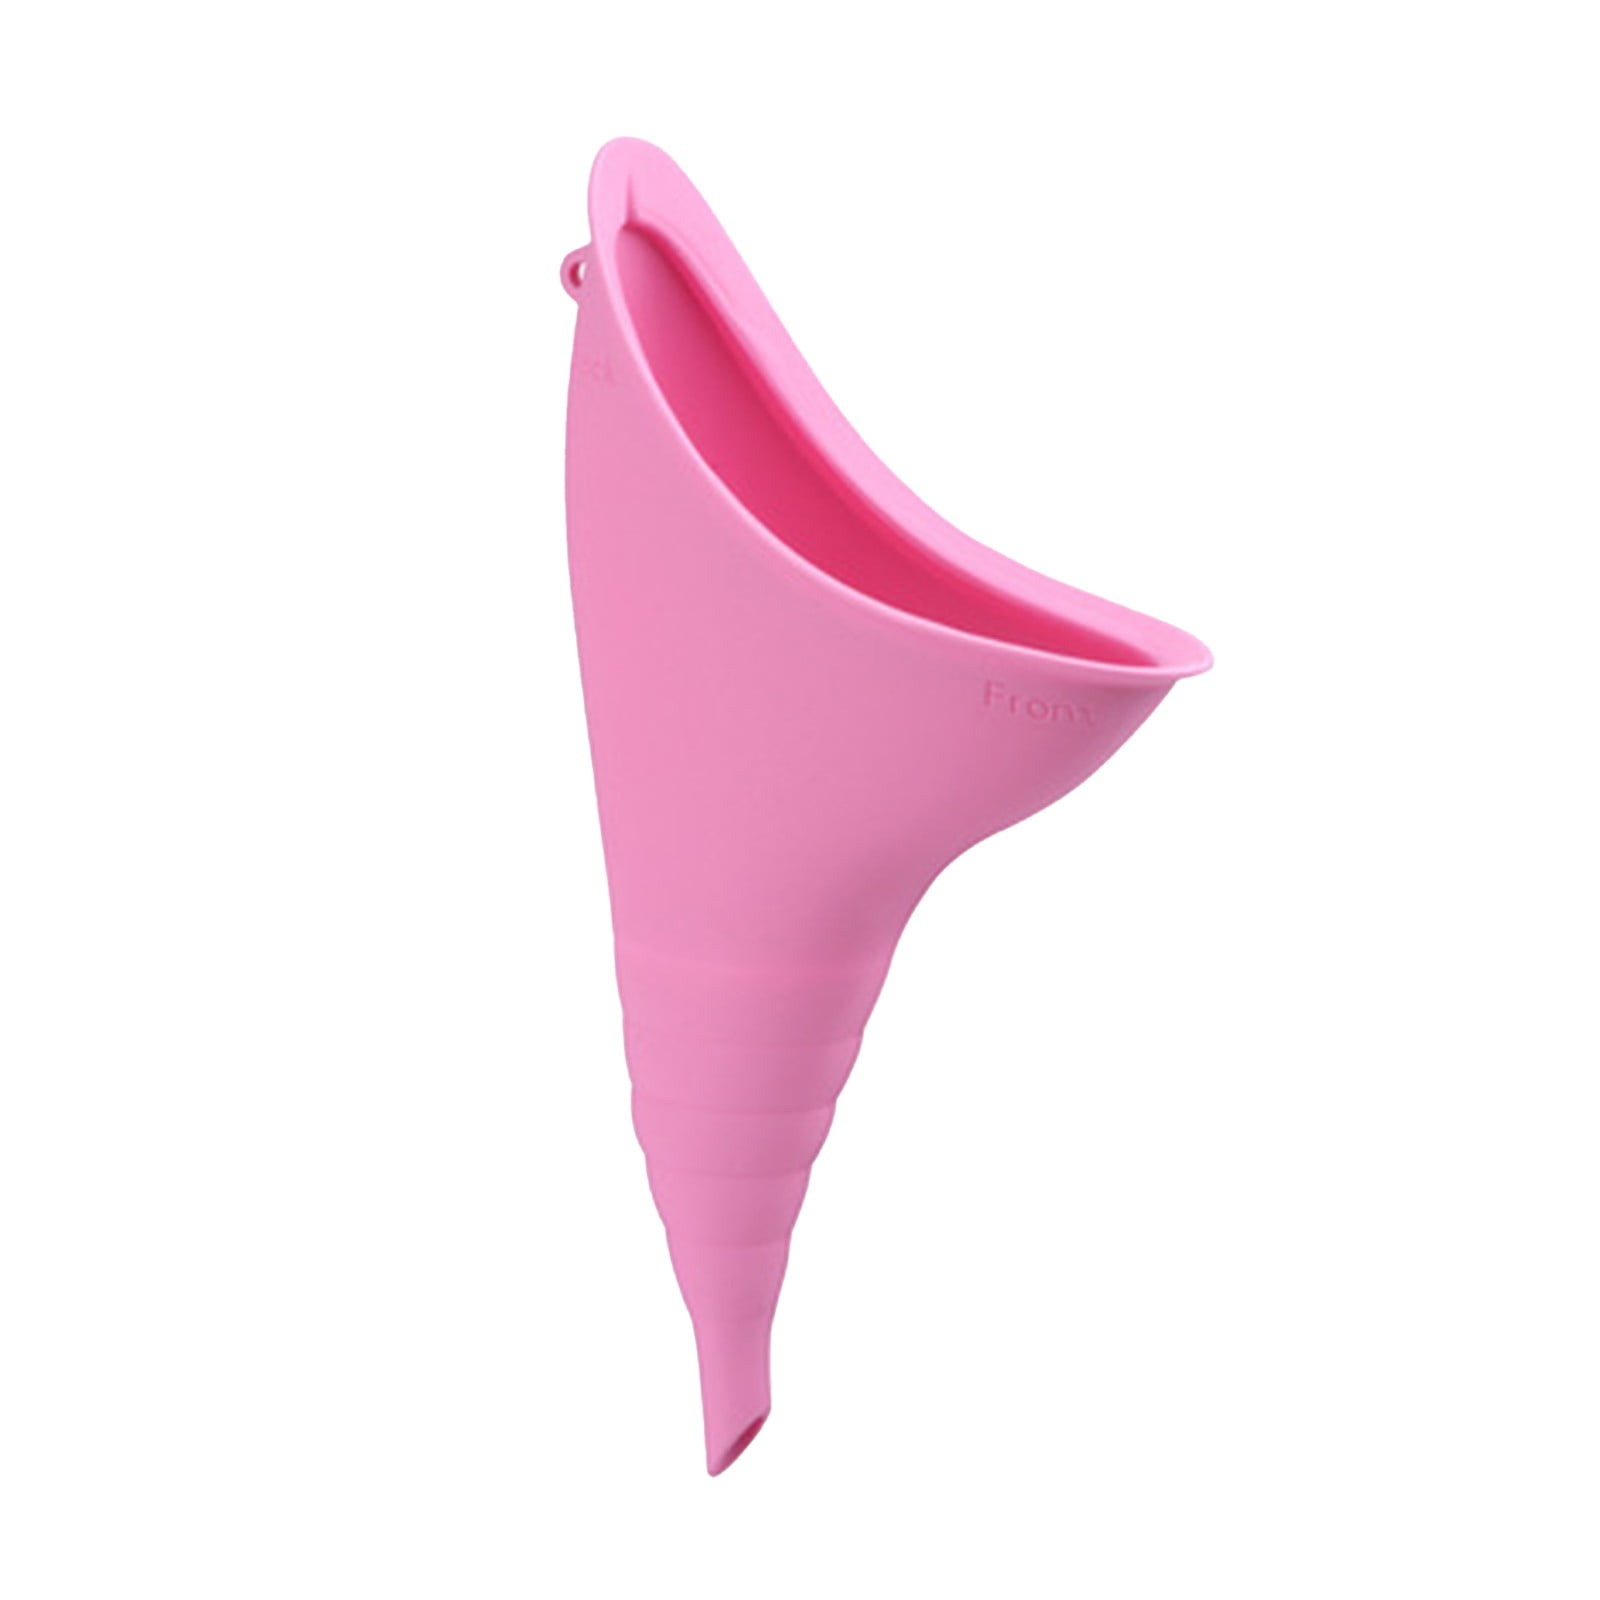 2PCS Portable Female Woman Ladies She Urinal Urine Wee Funnel Camping Travel Loo 